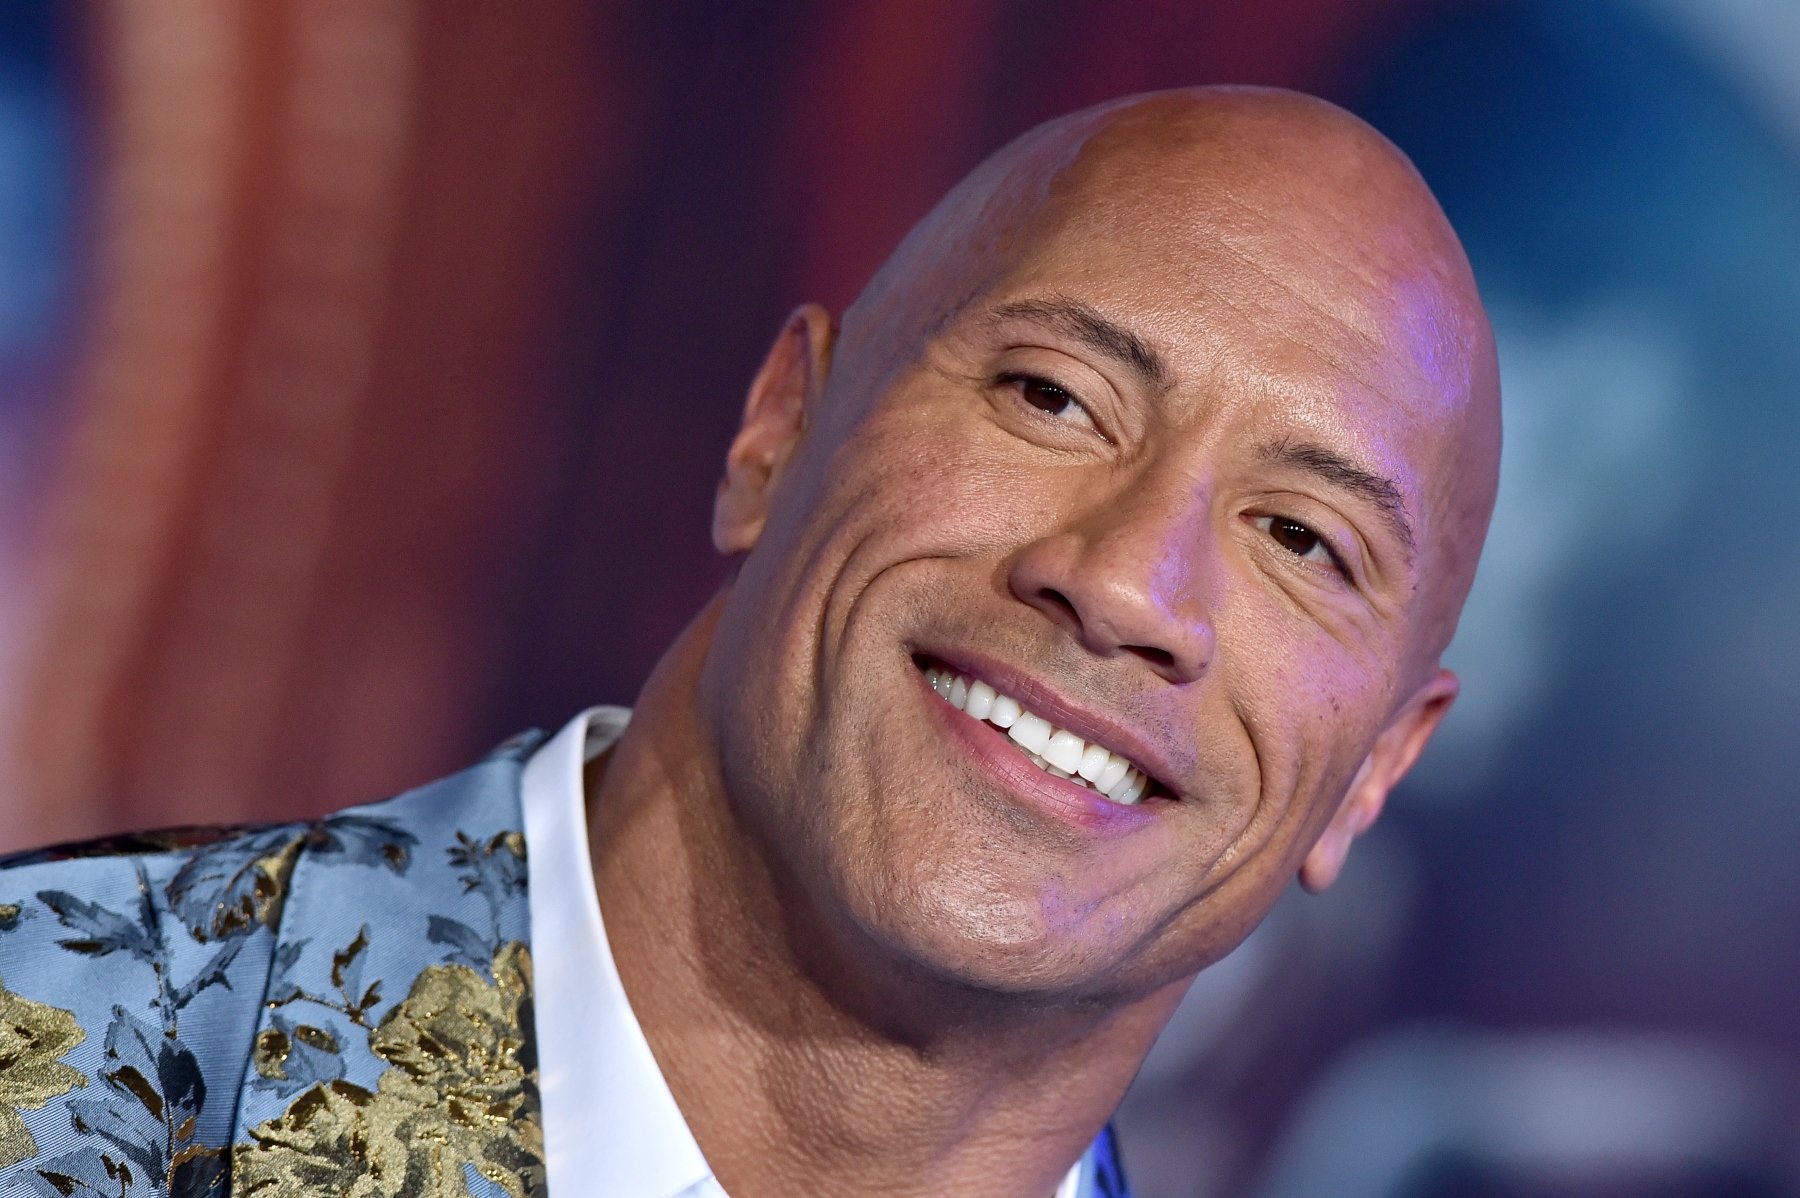 Dwayne 'The Rock' Johnson at the premiere for 'Jumanji: The Next Level'